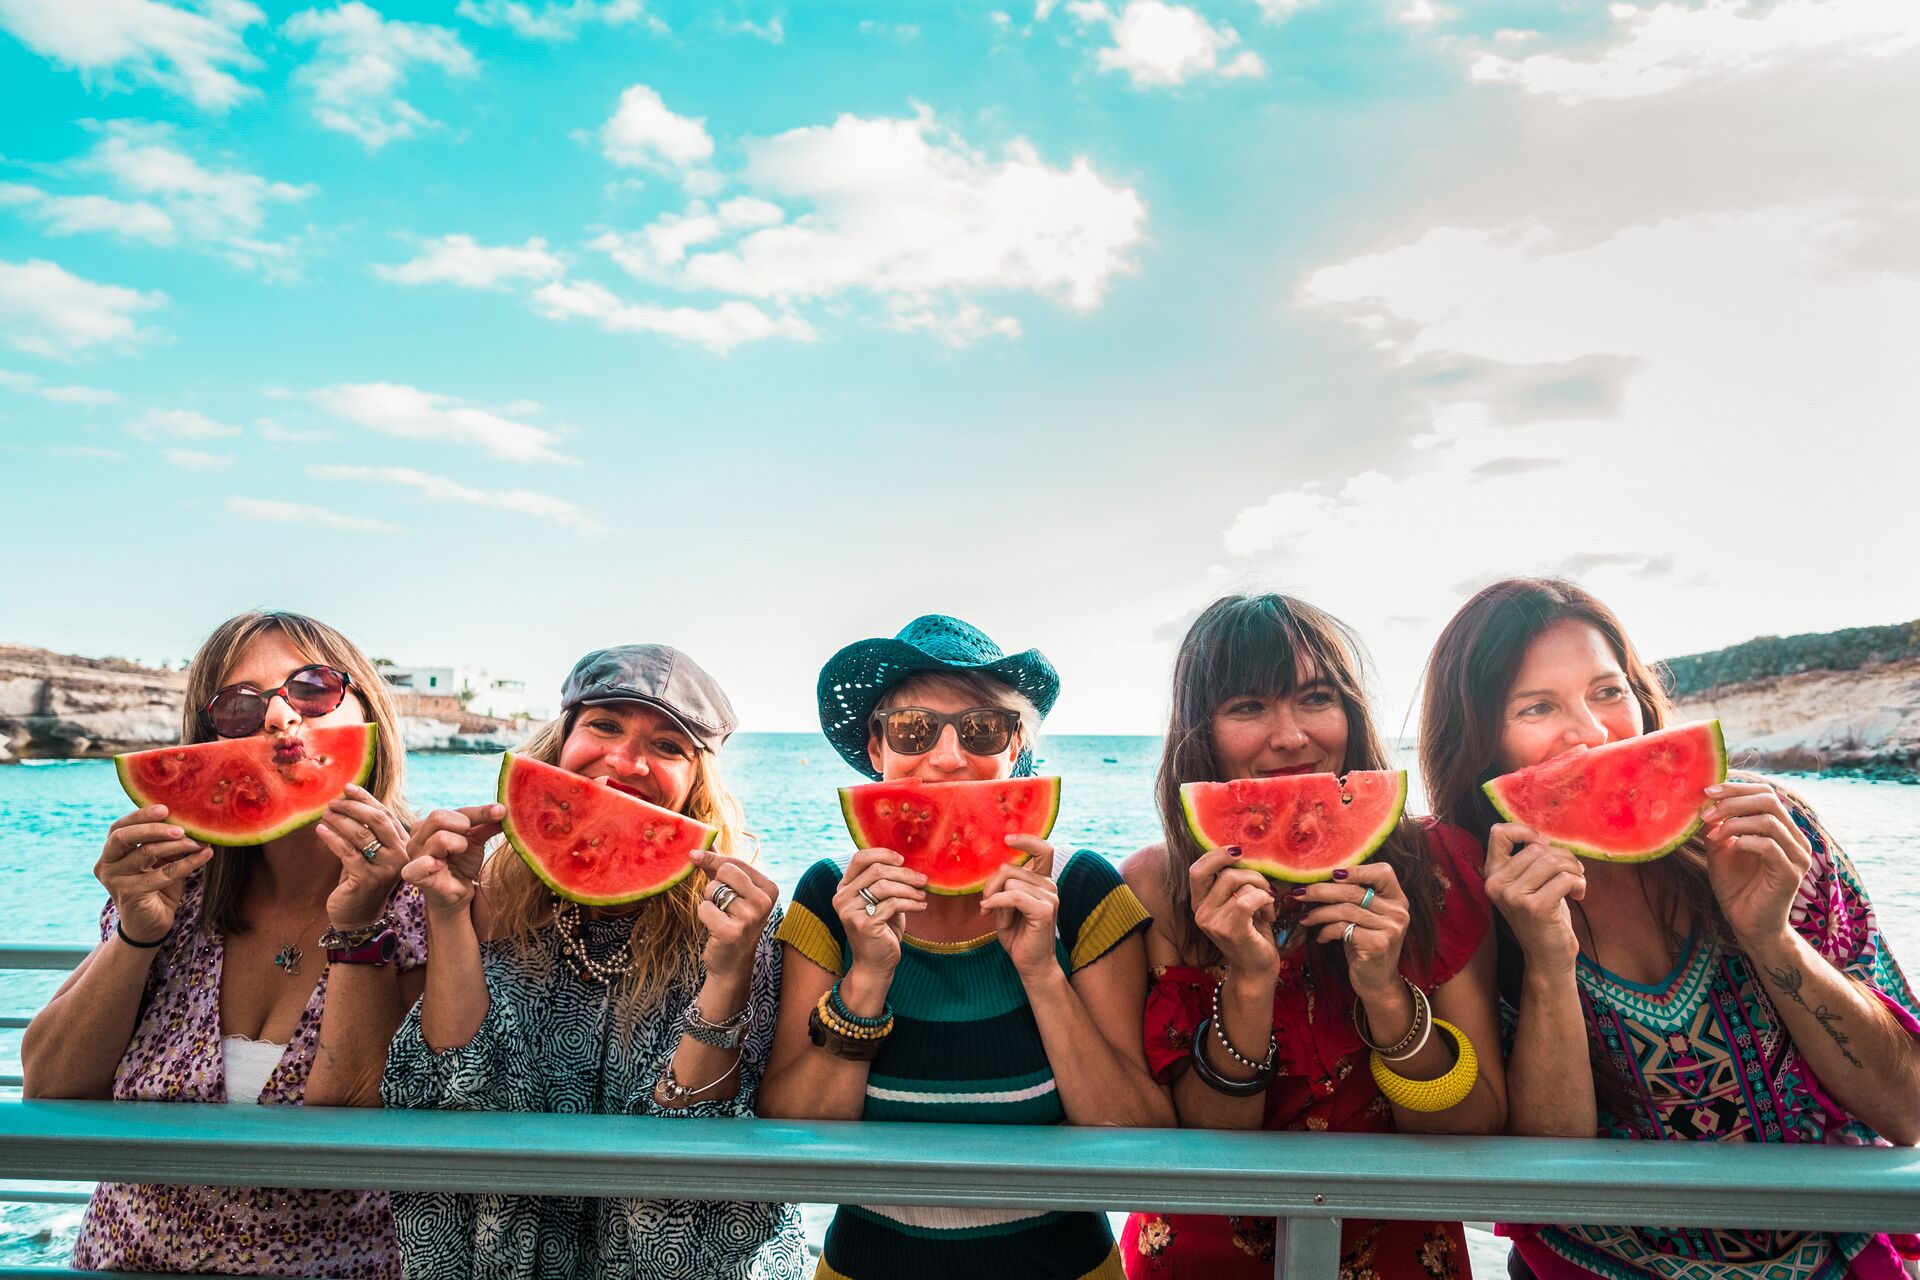 Large_MS PPT_Web-Women on vacation posing for a photo with watermelon slices.jpg